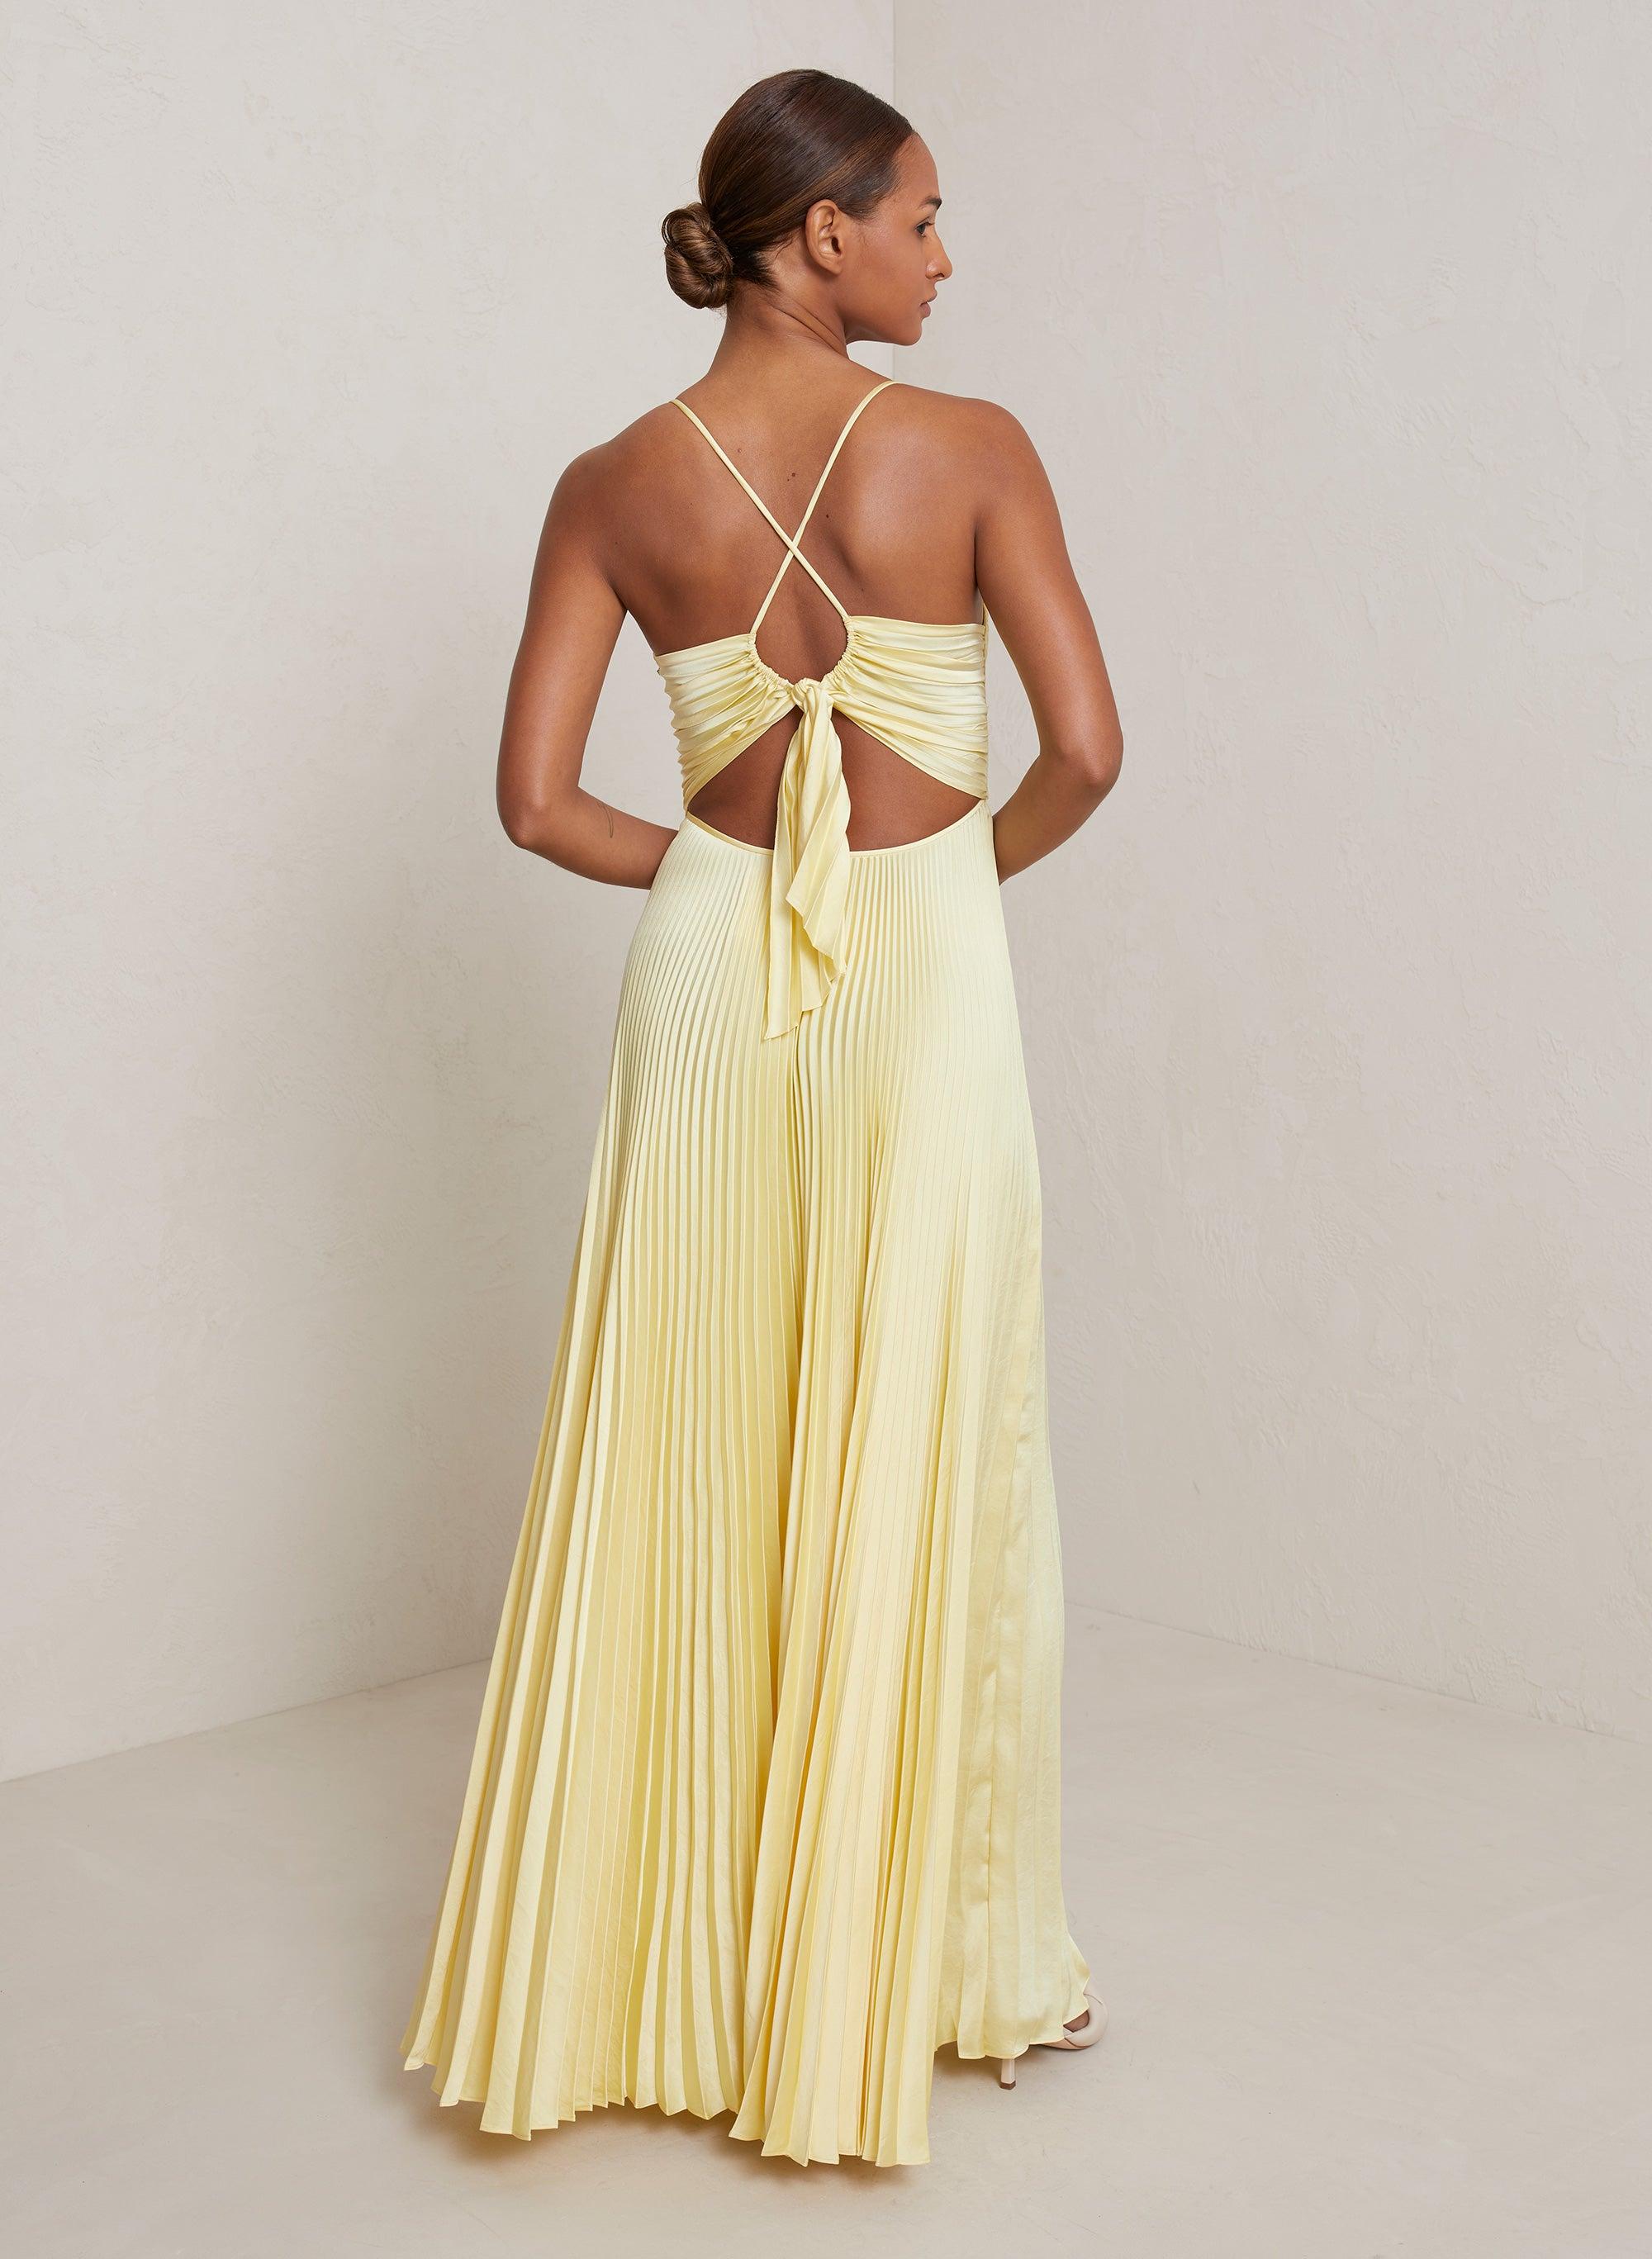 A.L.C. Aries Satin Pleated Dress in Yellow | Lyst